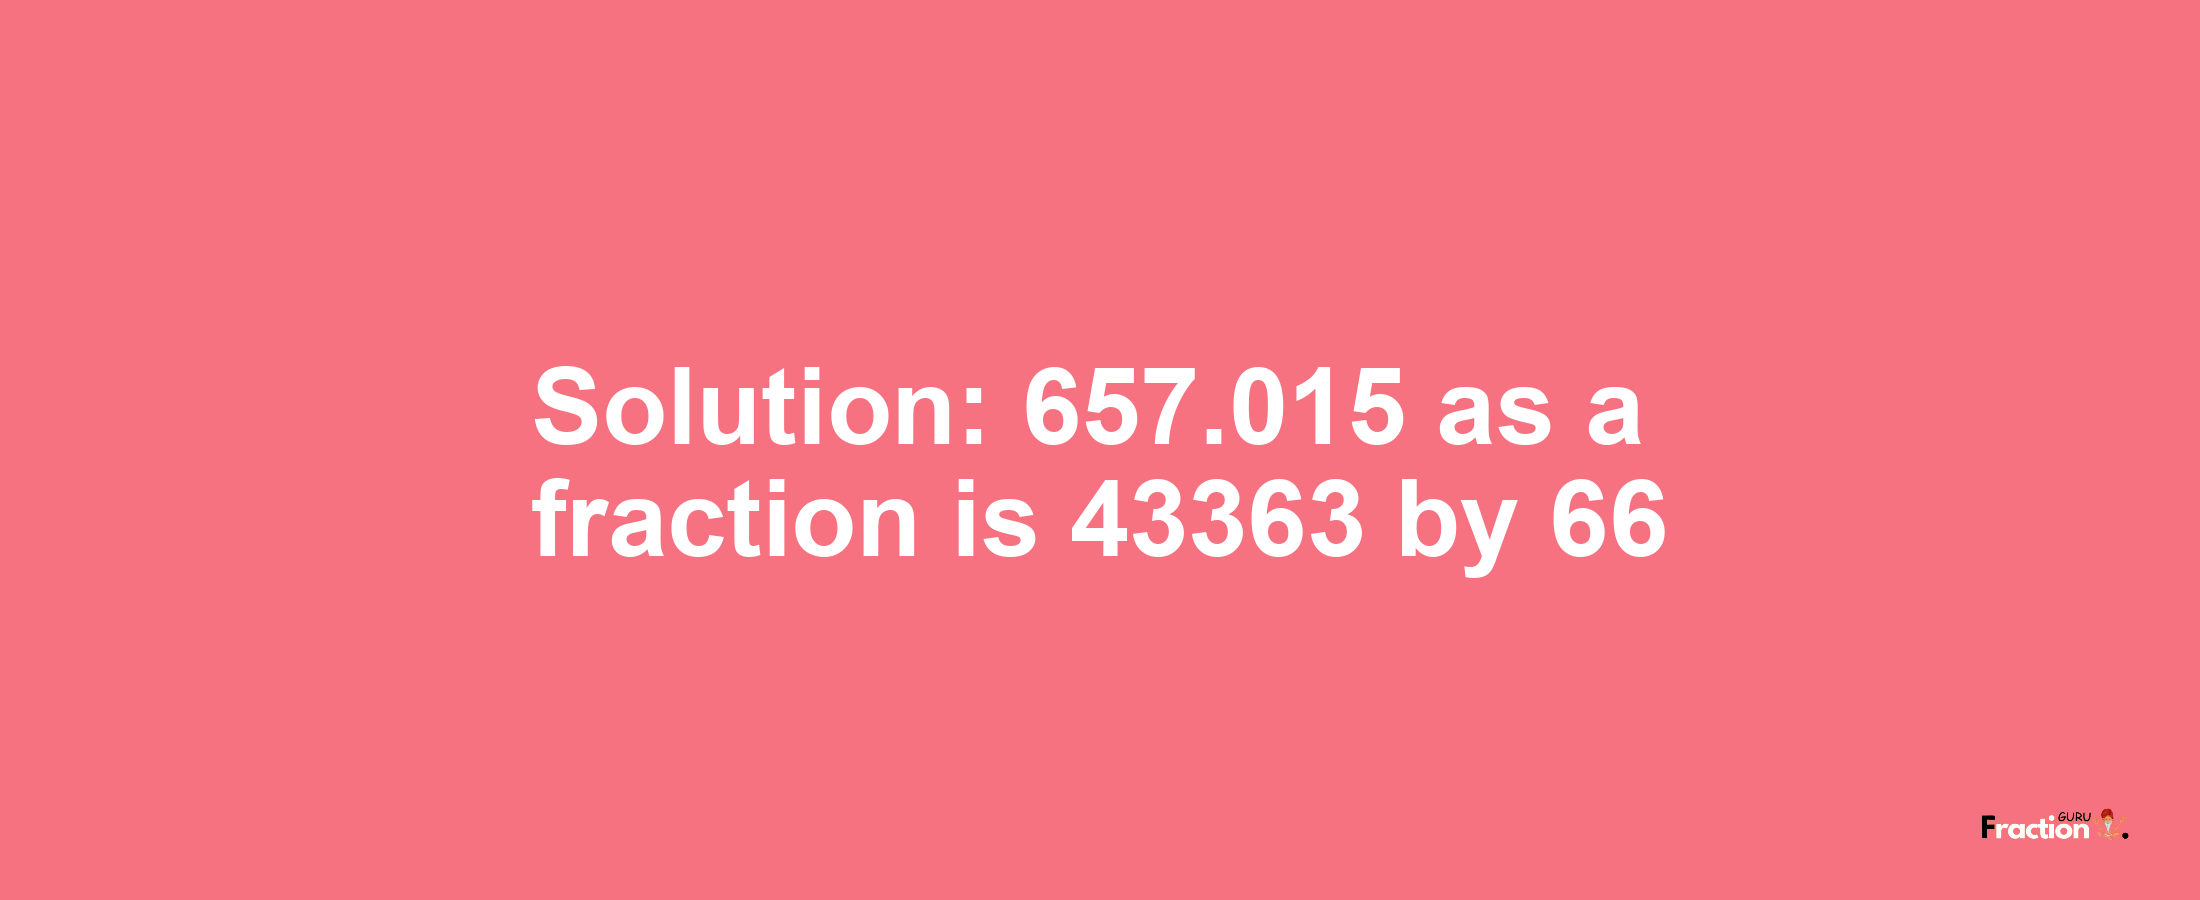 Solution:657.015 as a fraction is 43363/66